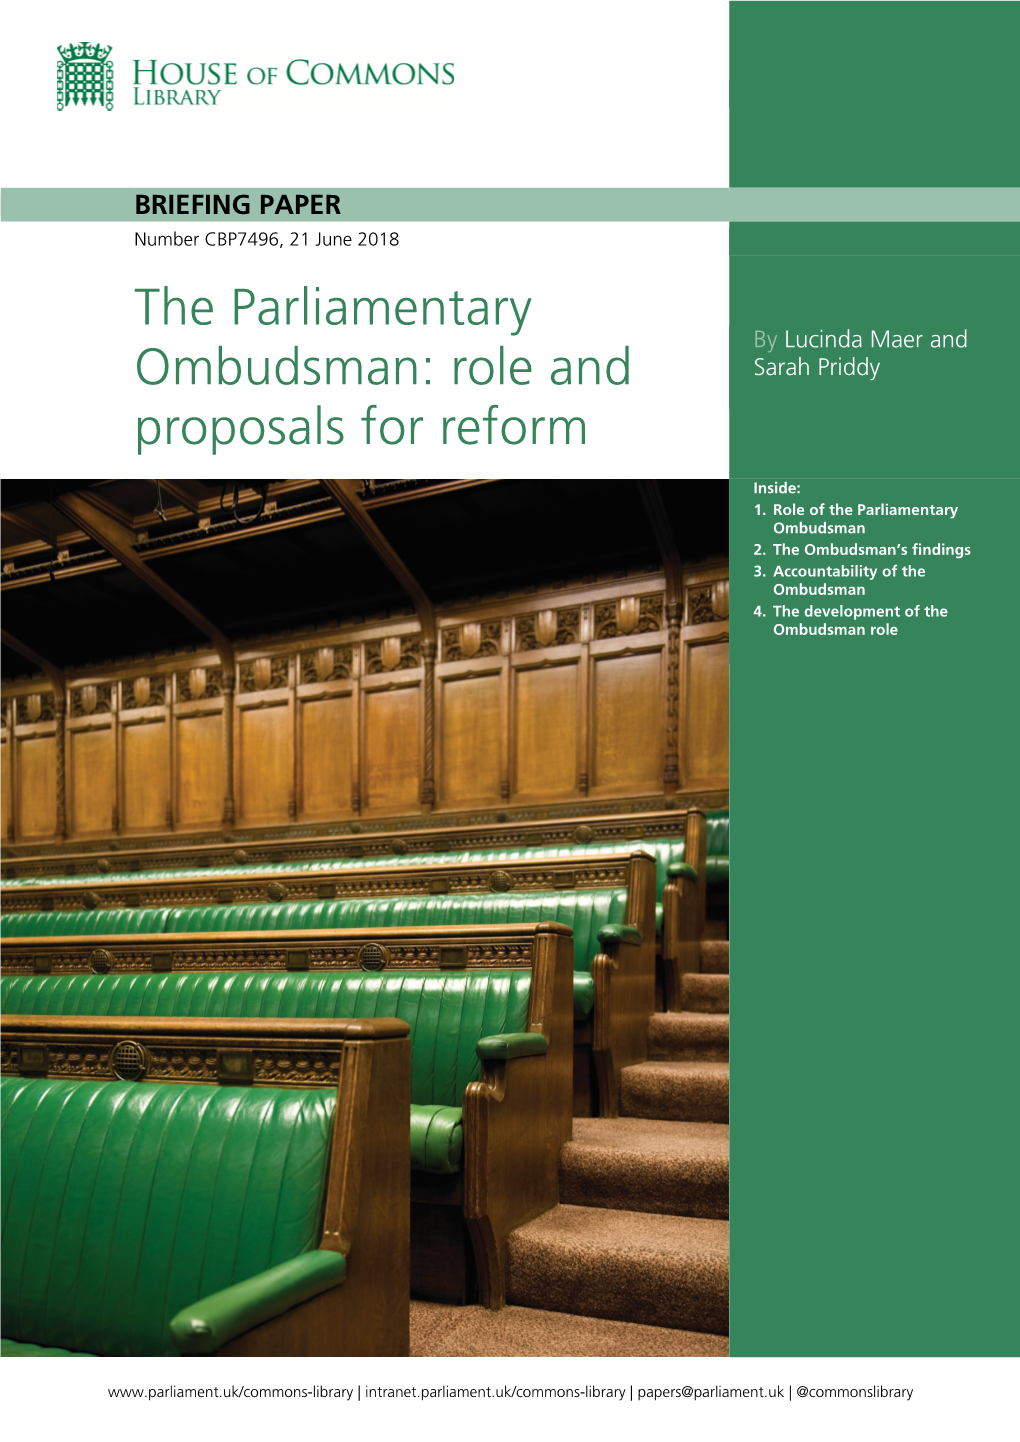 The Parliamentary Ombudsman: Role and Proposals for Reform